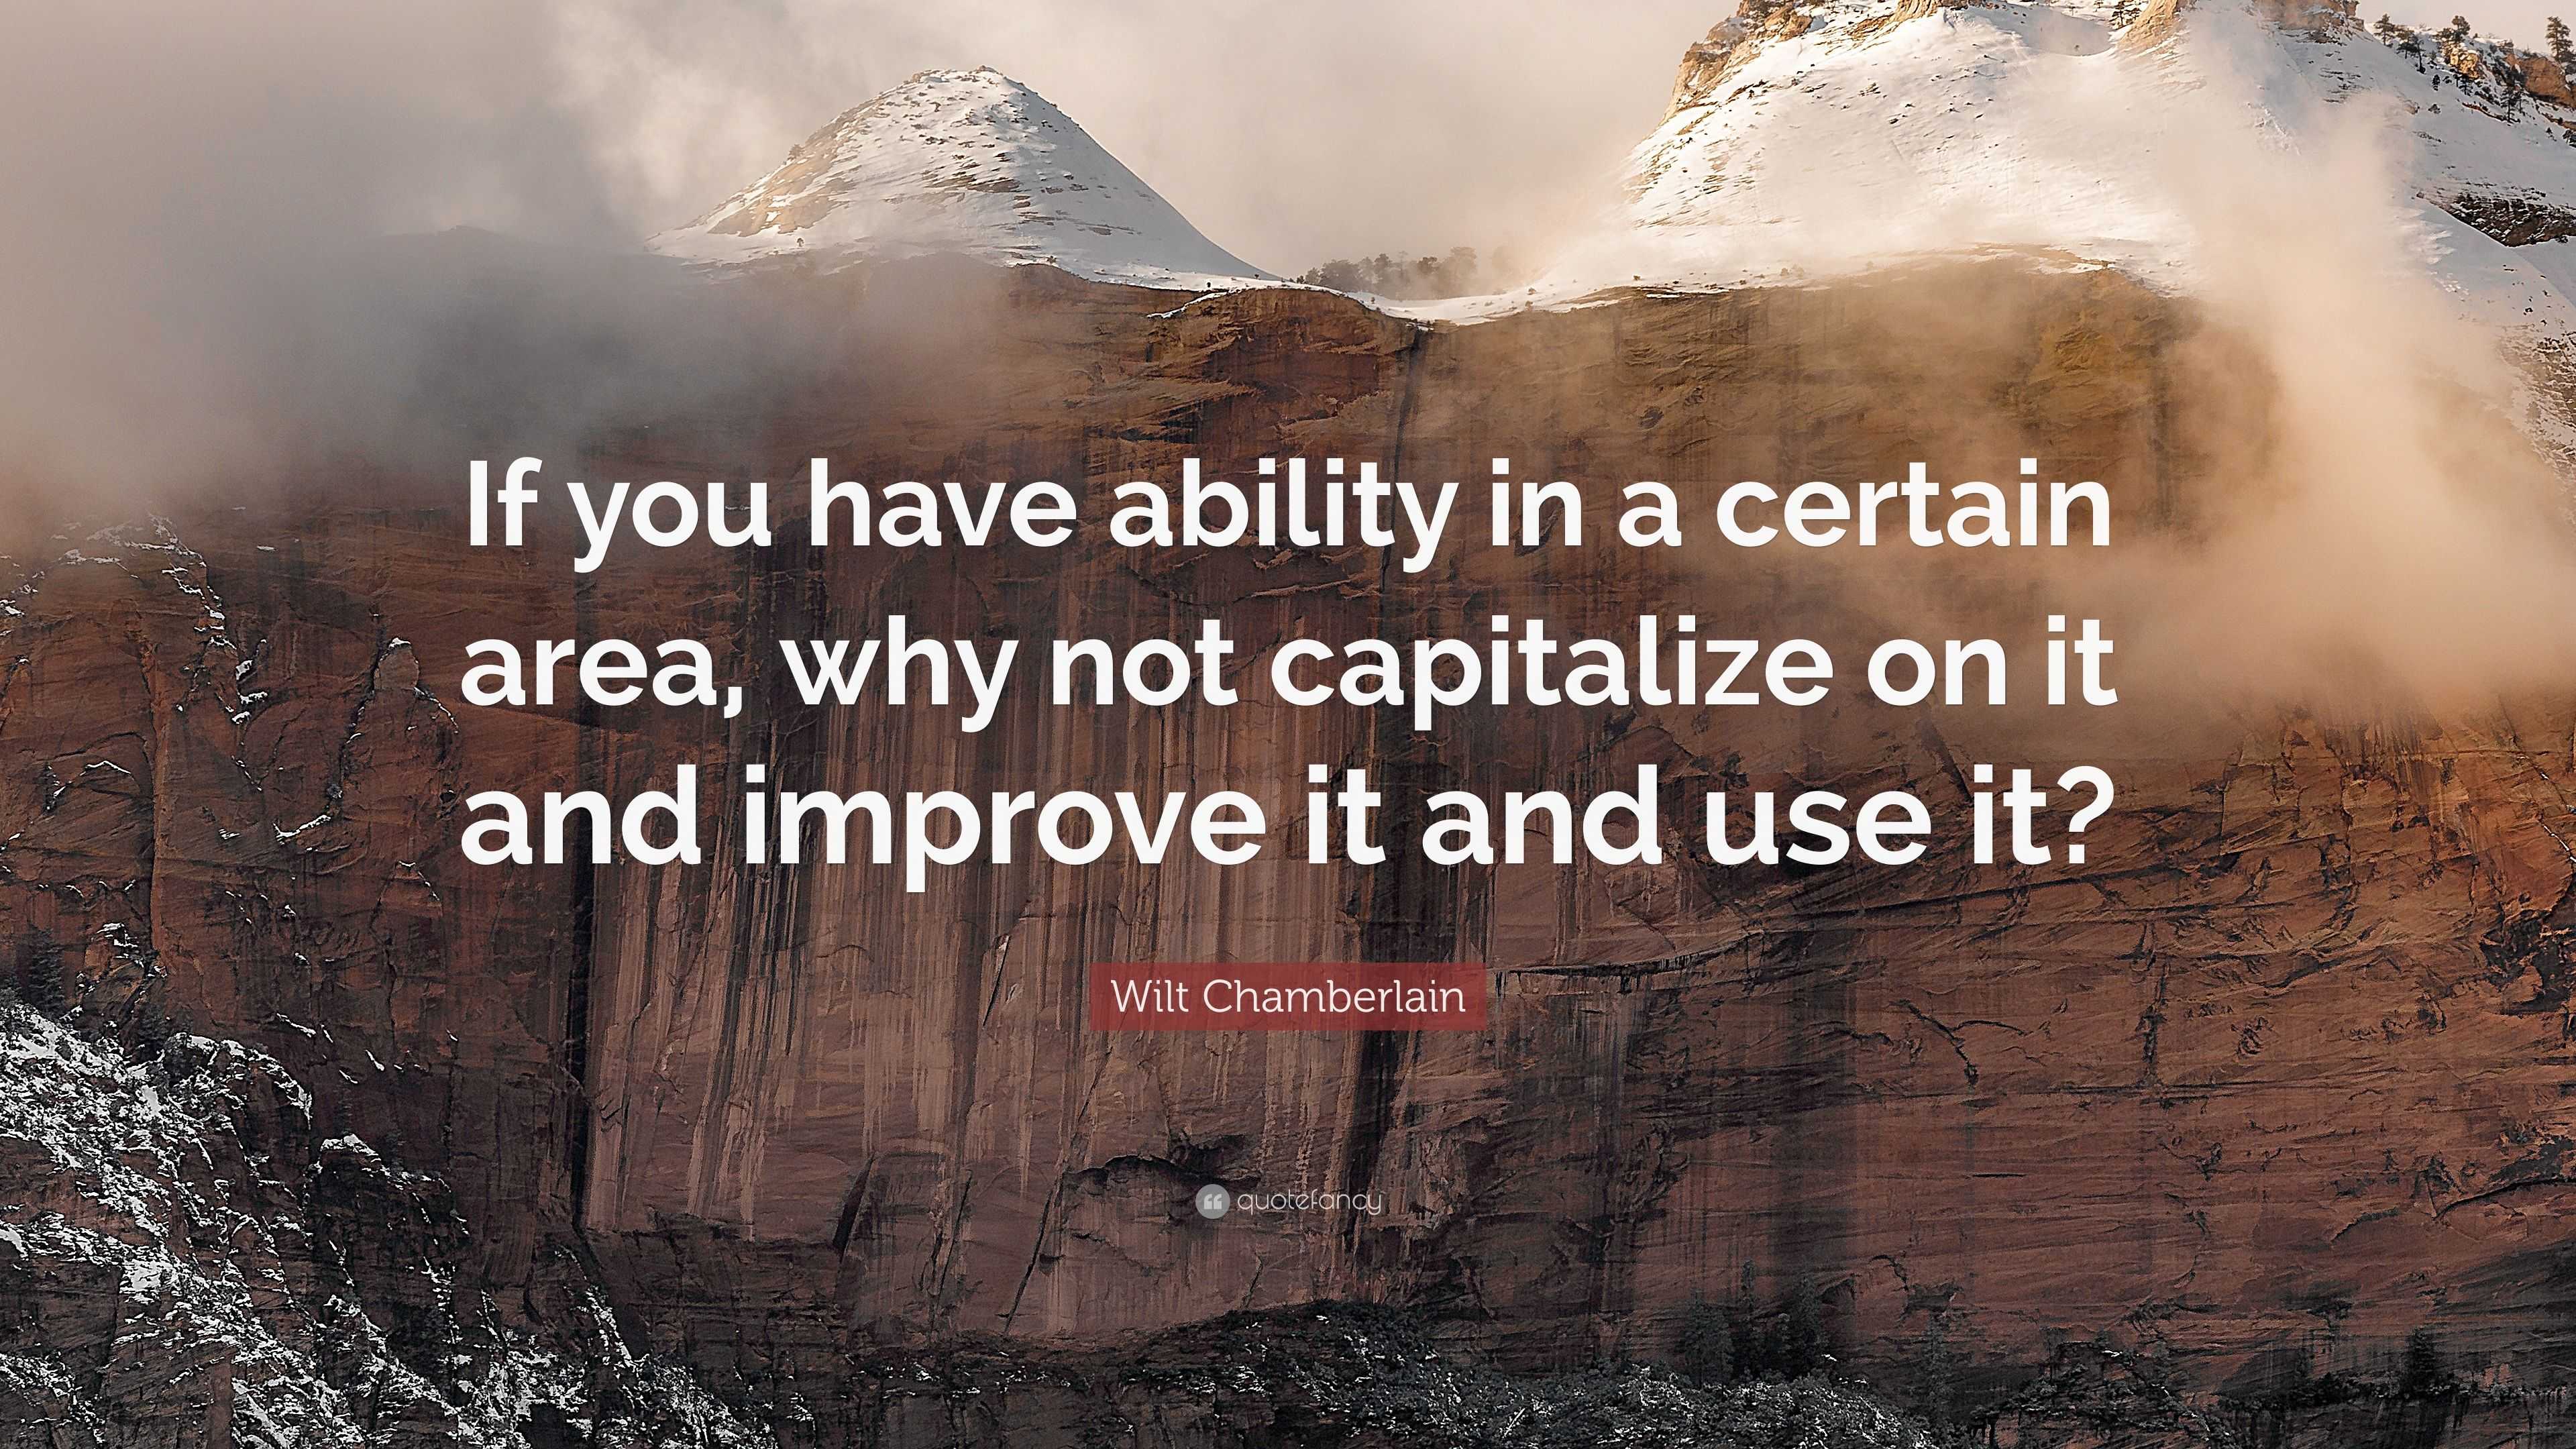 Wilt Chamberlain Quote: "If you have ability in a certain ...